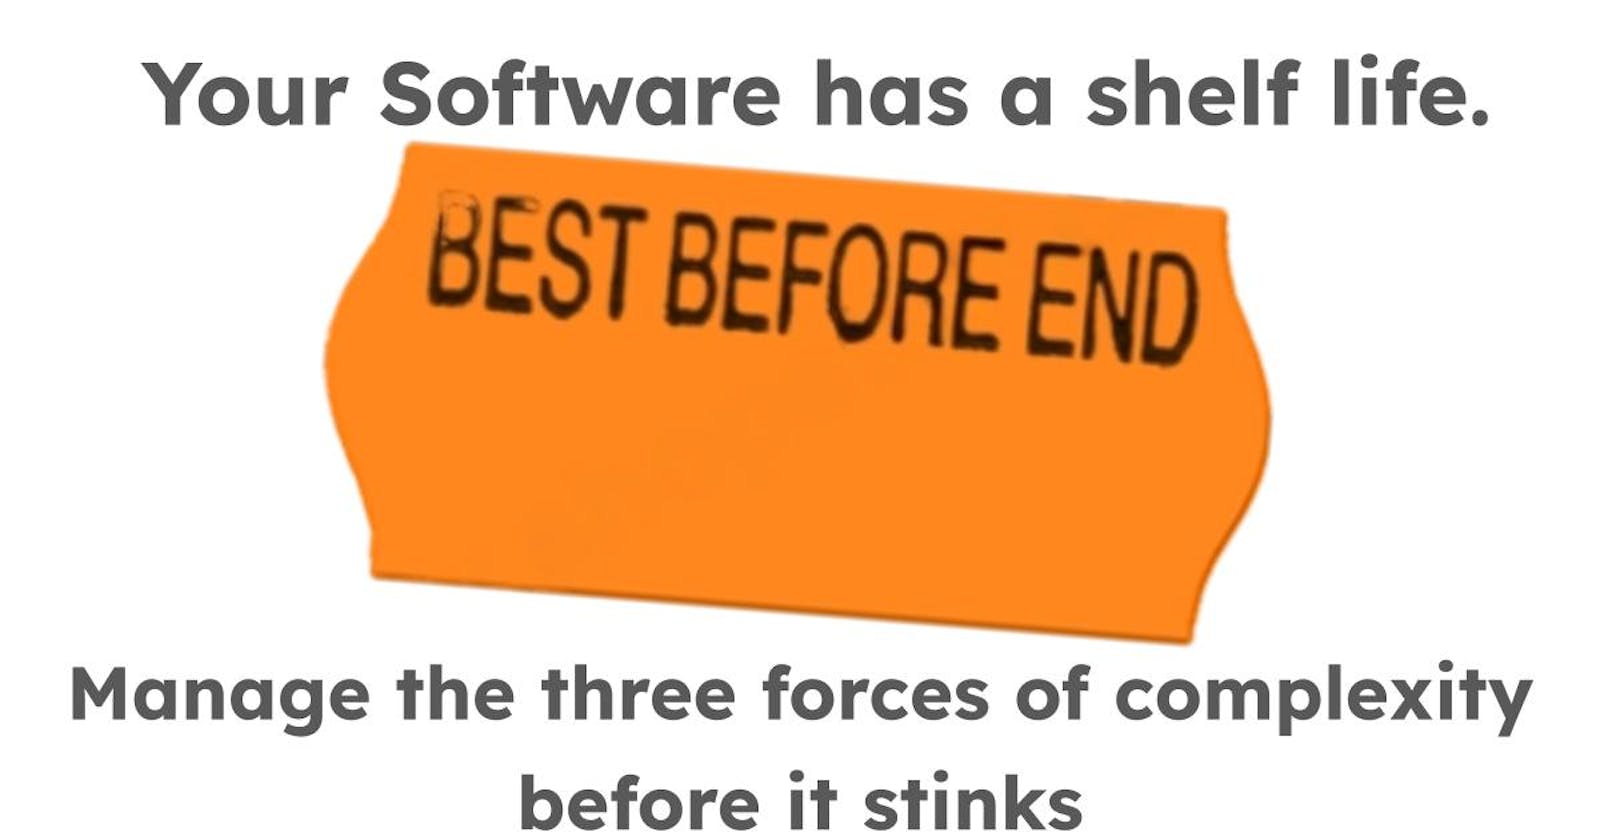 Best before end: Your Software has a shelf life.